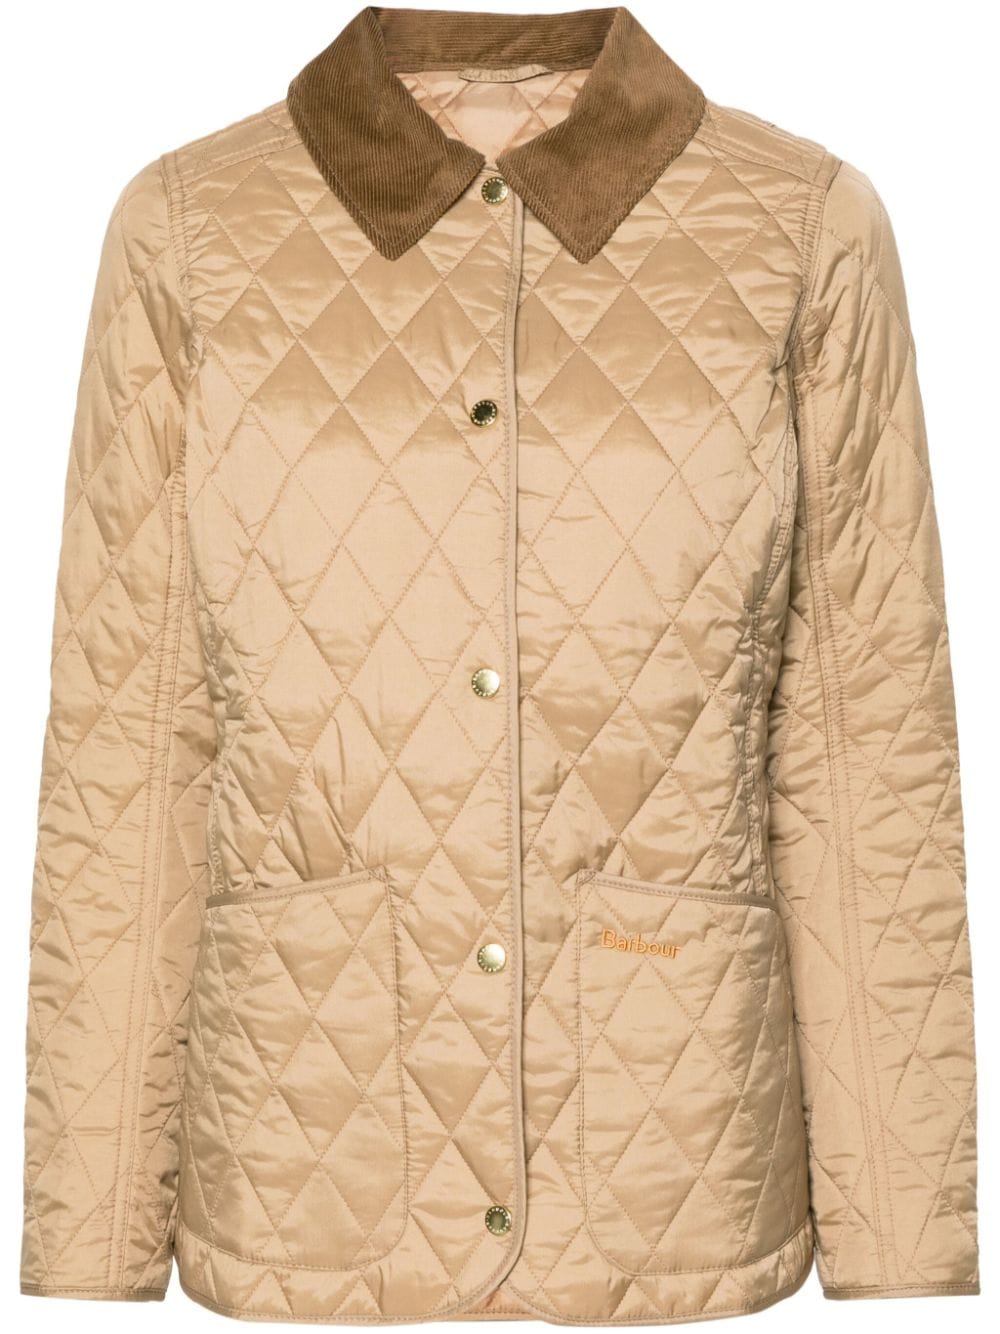 Barbour BARBOUR- Annandale Quilted Jacket